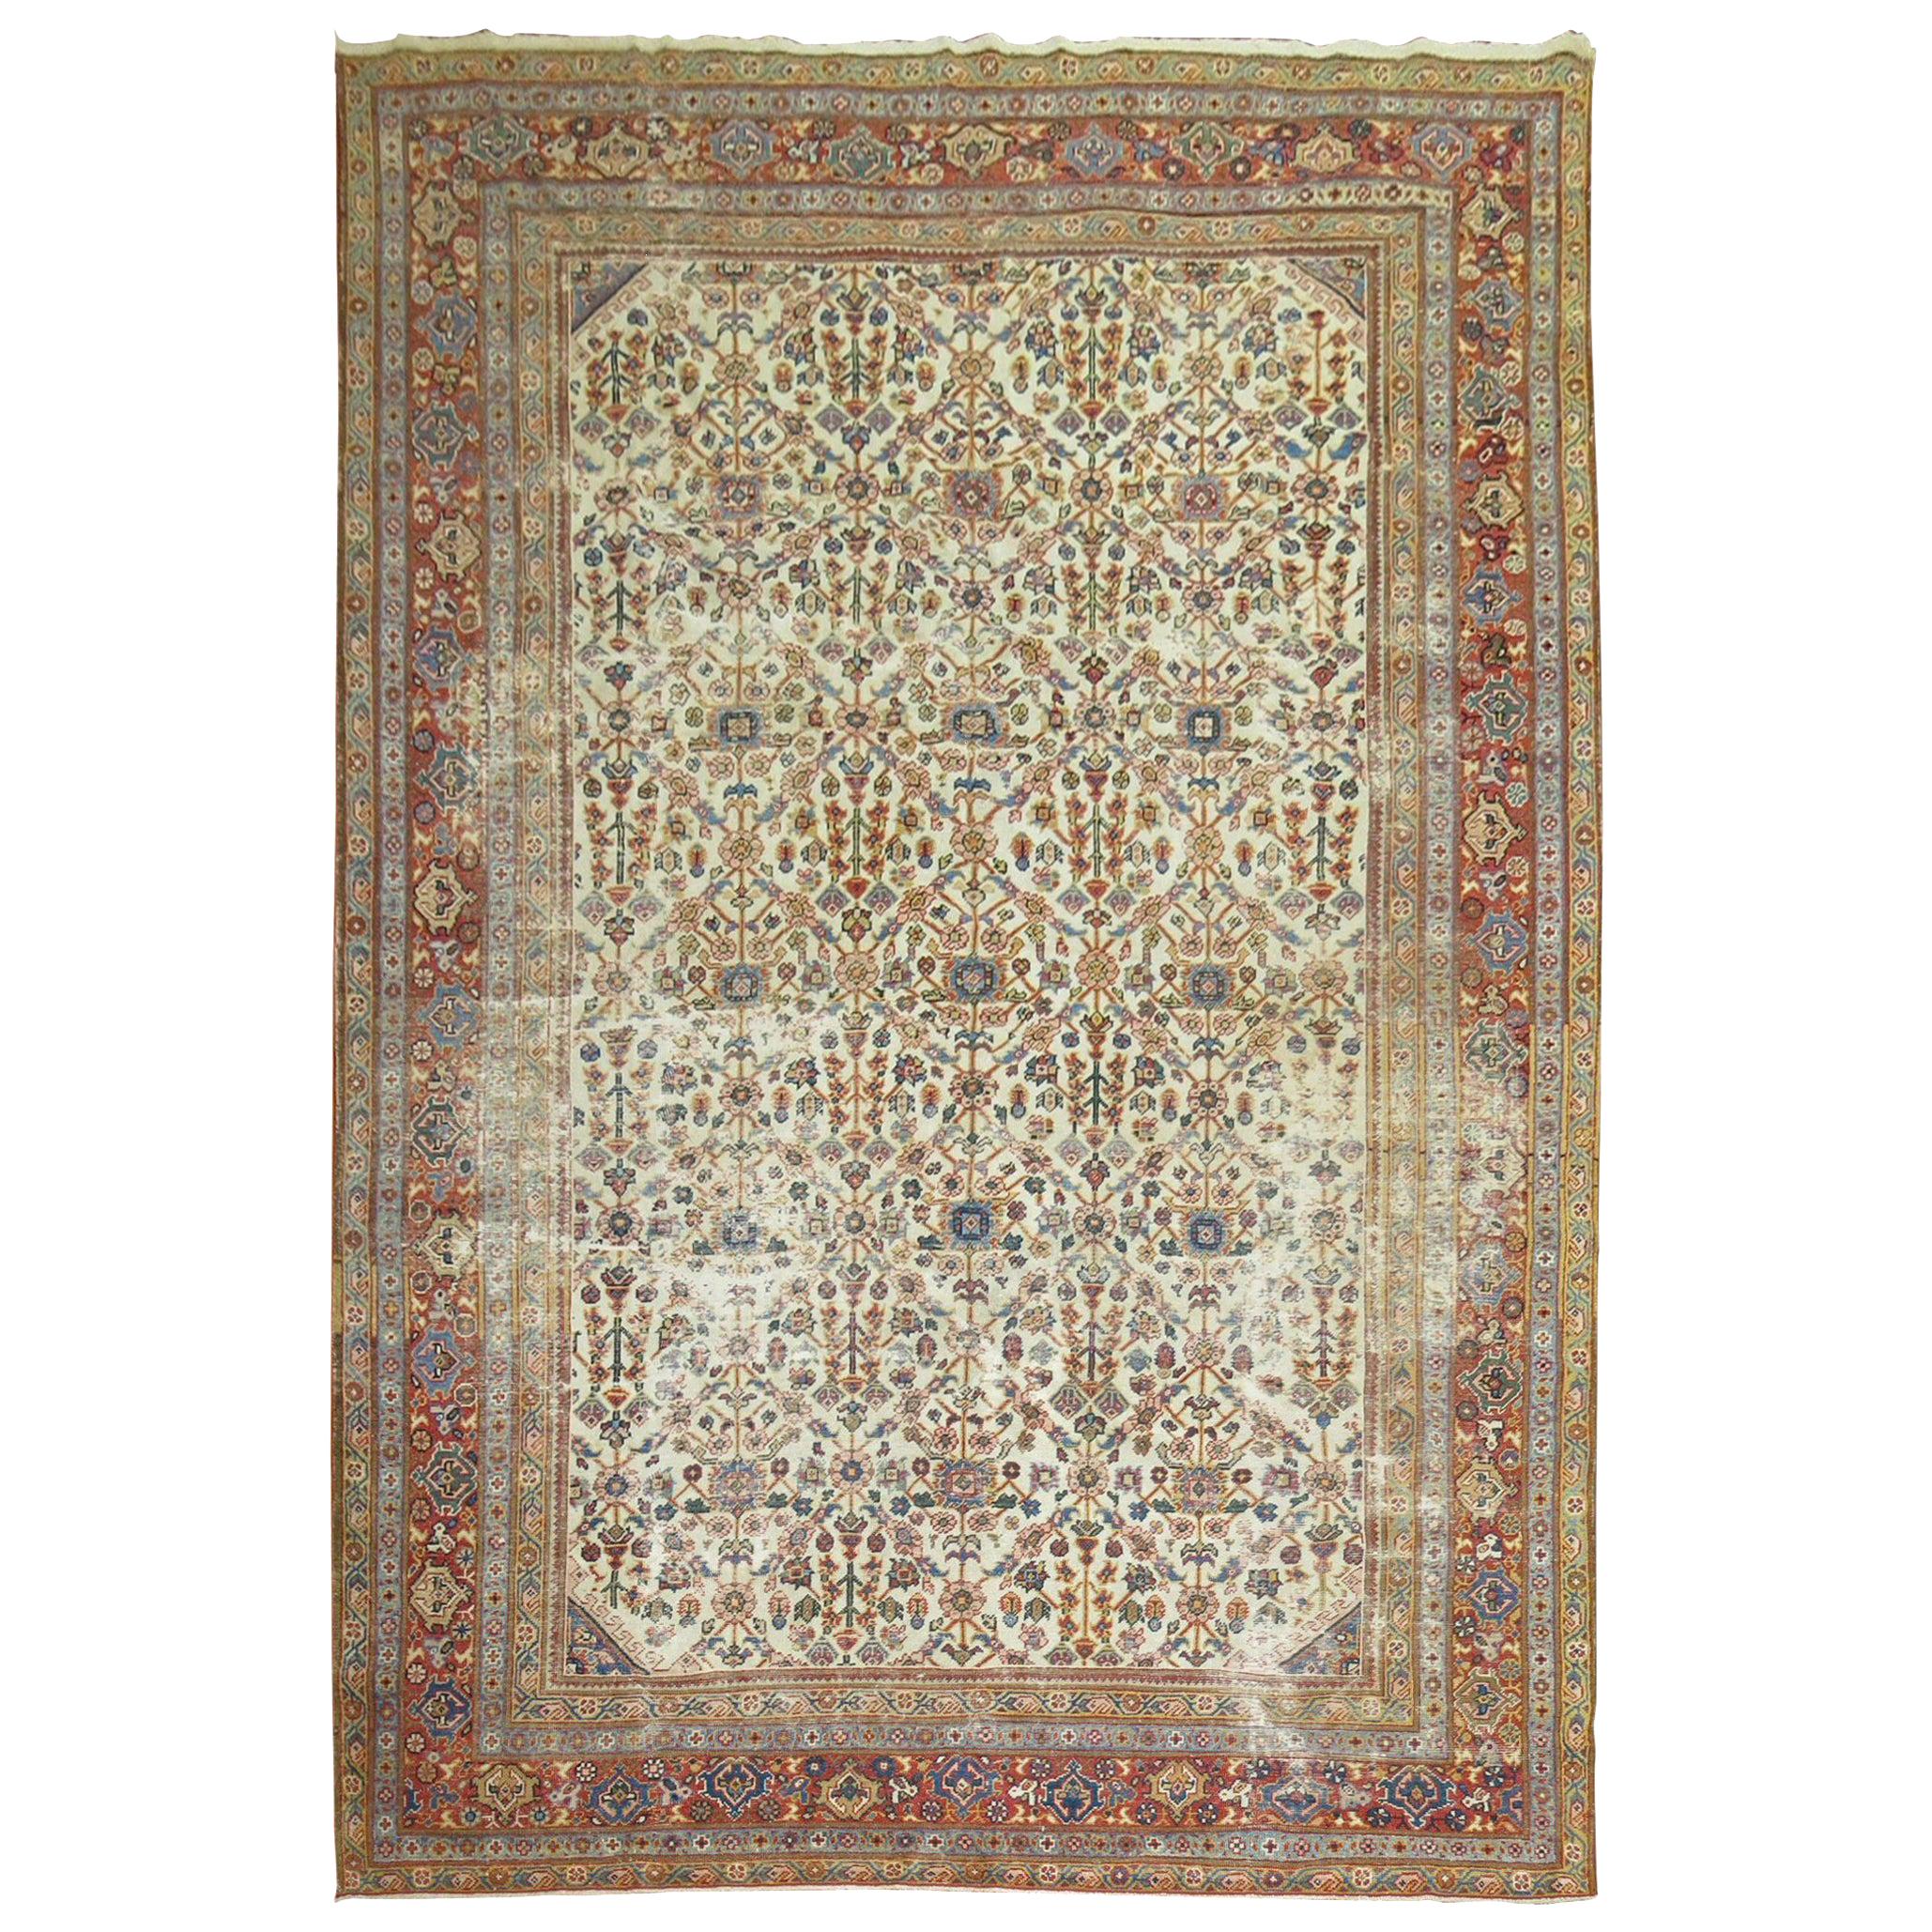 Worn Persian Room Size Oriental Early 20th Century Rug